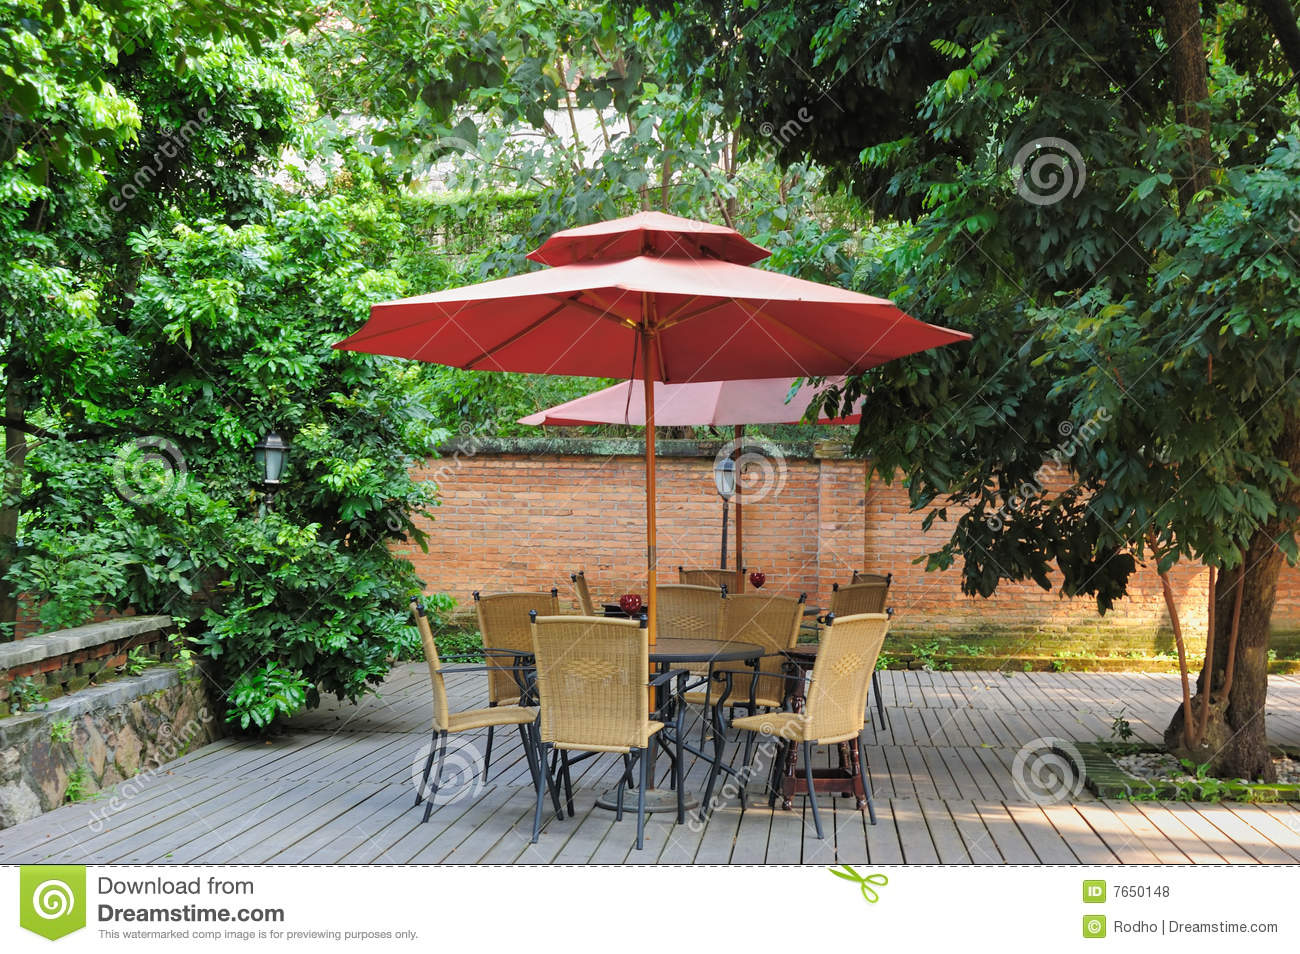 Summer Patio With Tables And Cane Chairs Under Umbrella In China